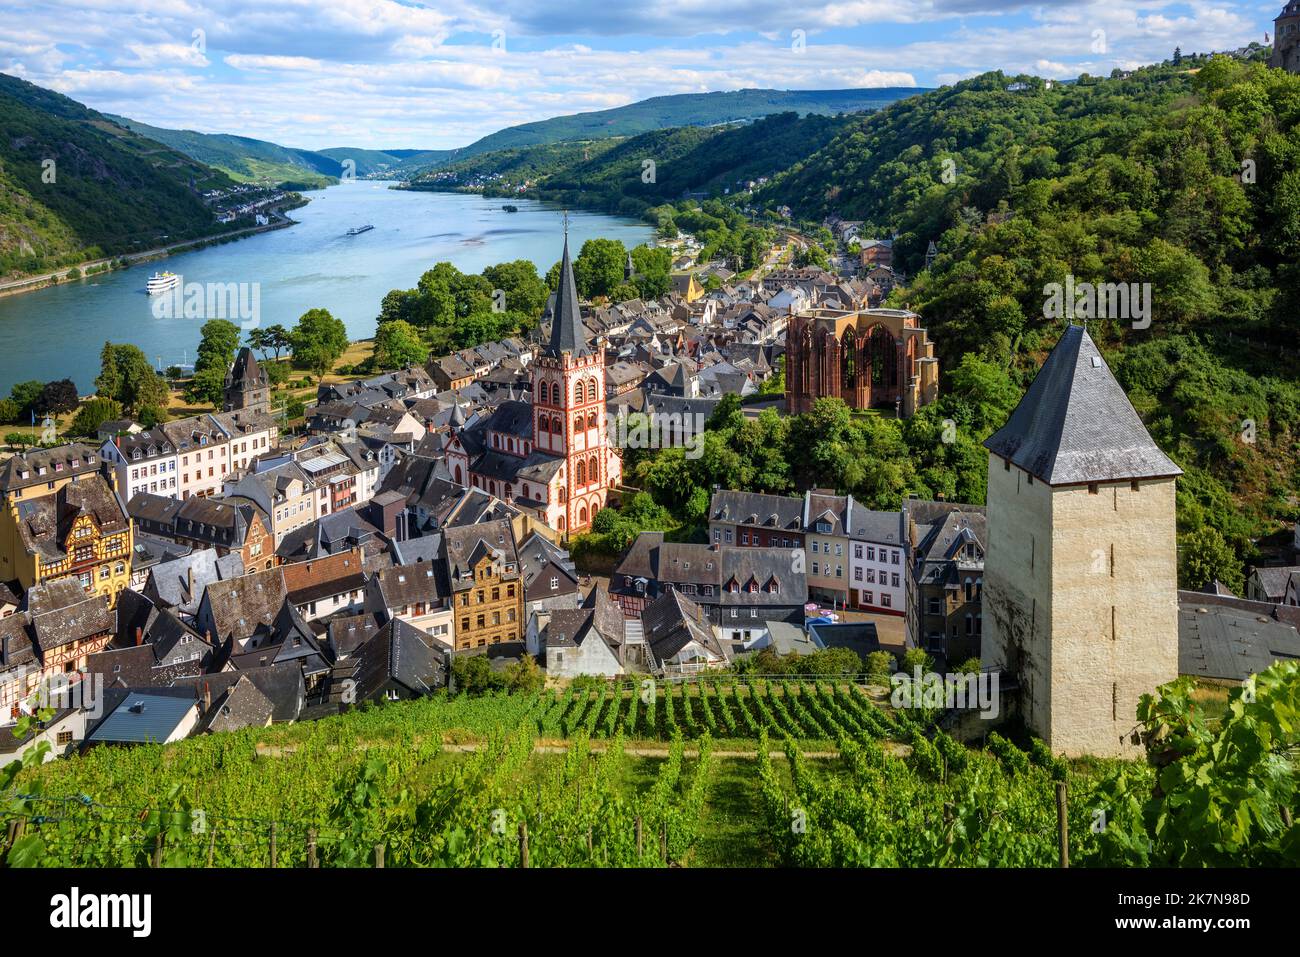 Bacharach am Rhein, Germany, view of the Old town and Rhine river valley from surrounding vineyards Stock Photo